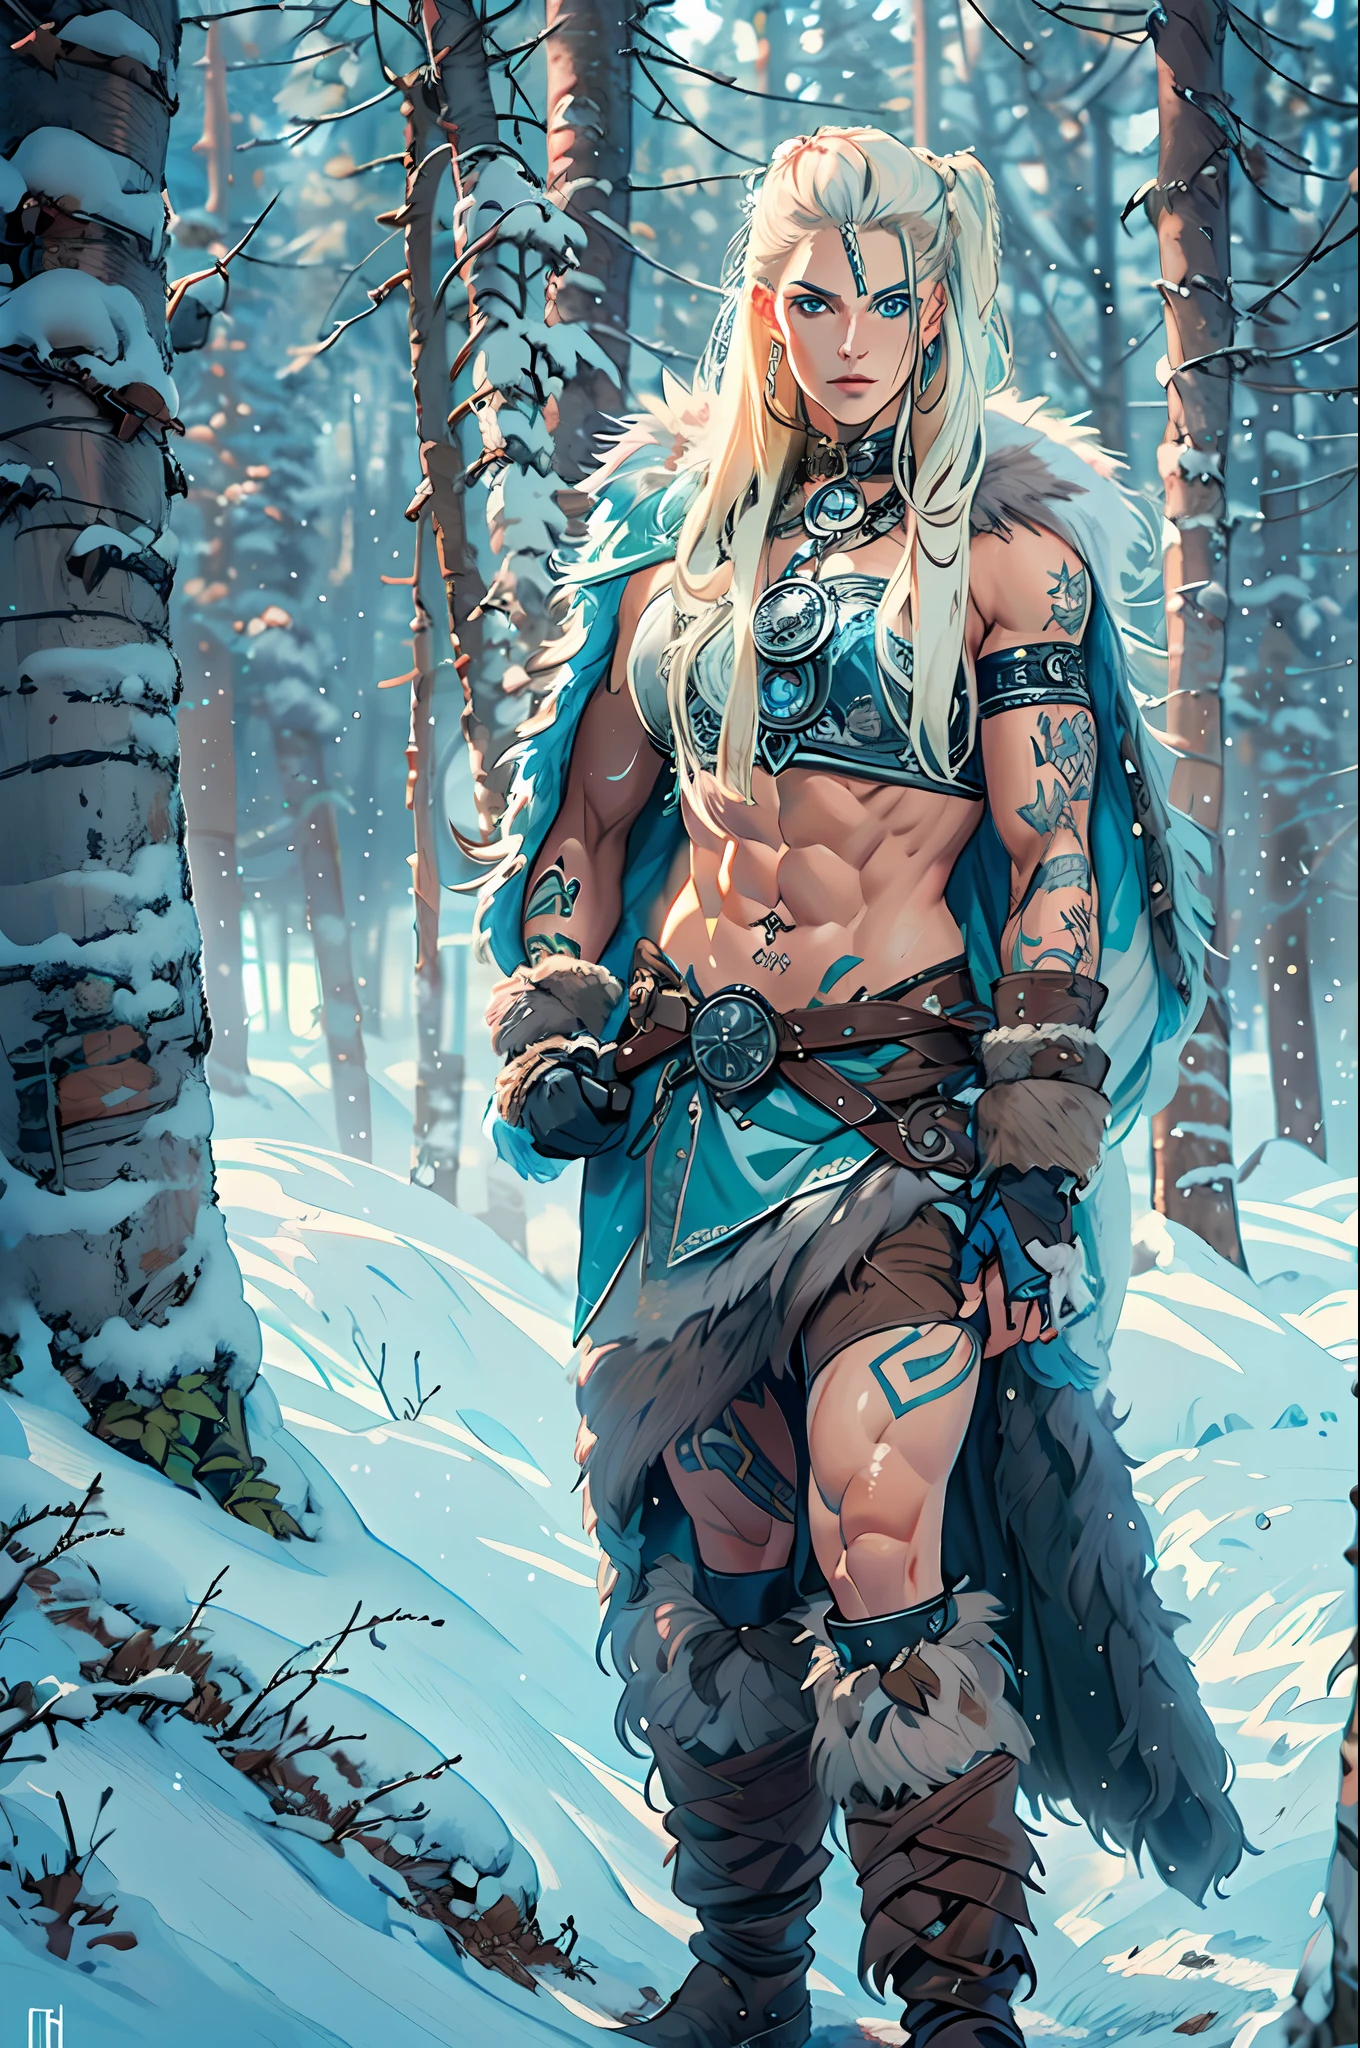 Female viking, muscular, wearing furs and hides, blue norse tattoos, blue eyes, platinum blonde hair. Setting is a Scandinavian forest in winter, bare arms, exposed naval, abs. Ultra quality image with realistic details. HDR